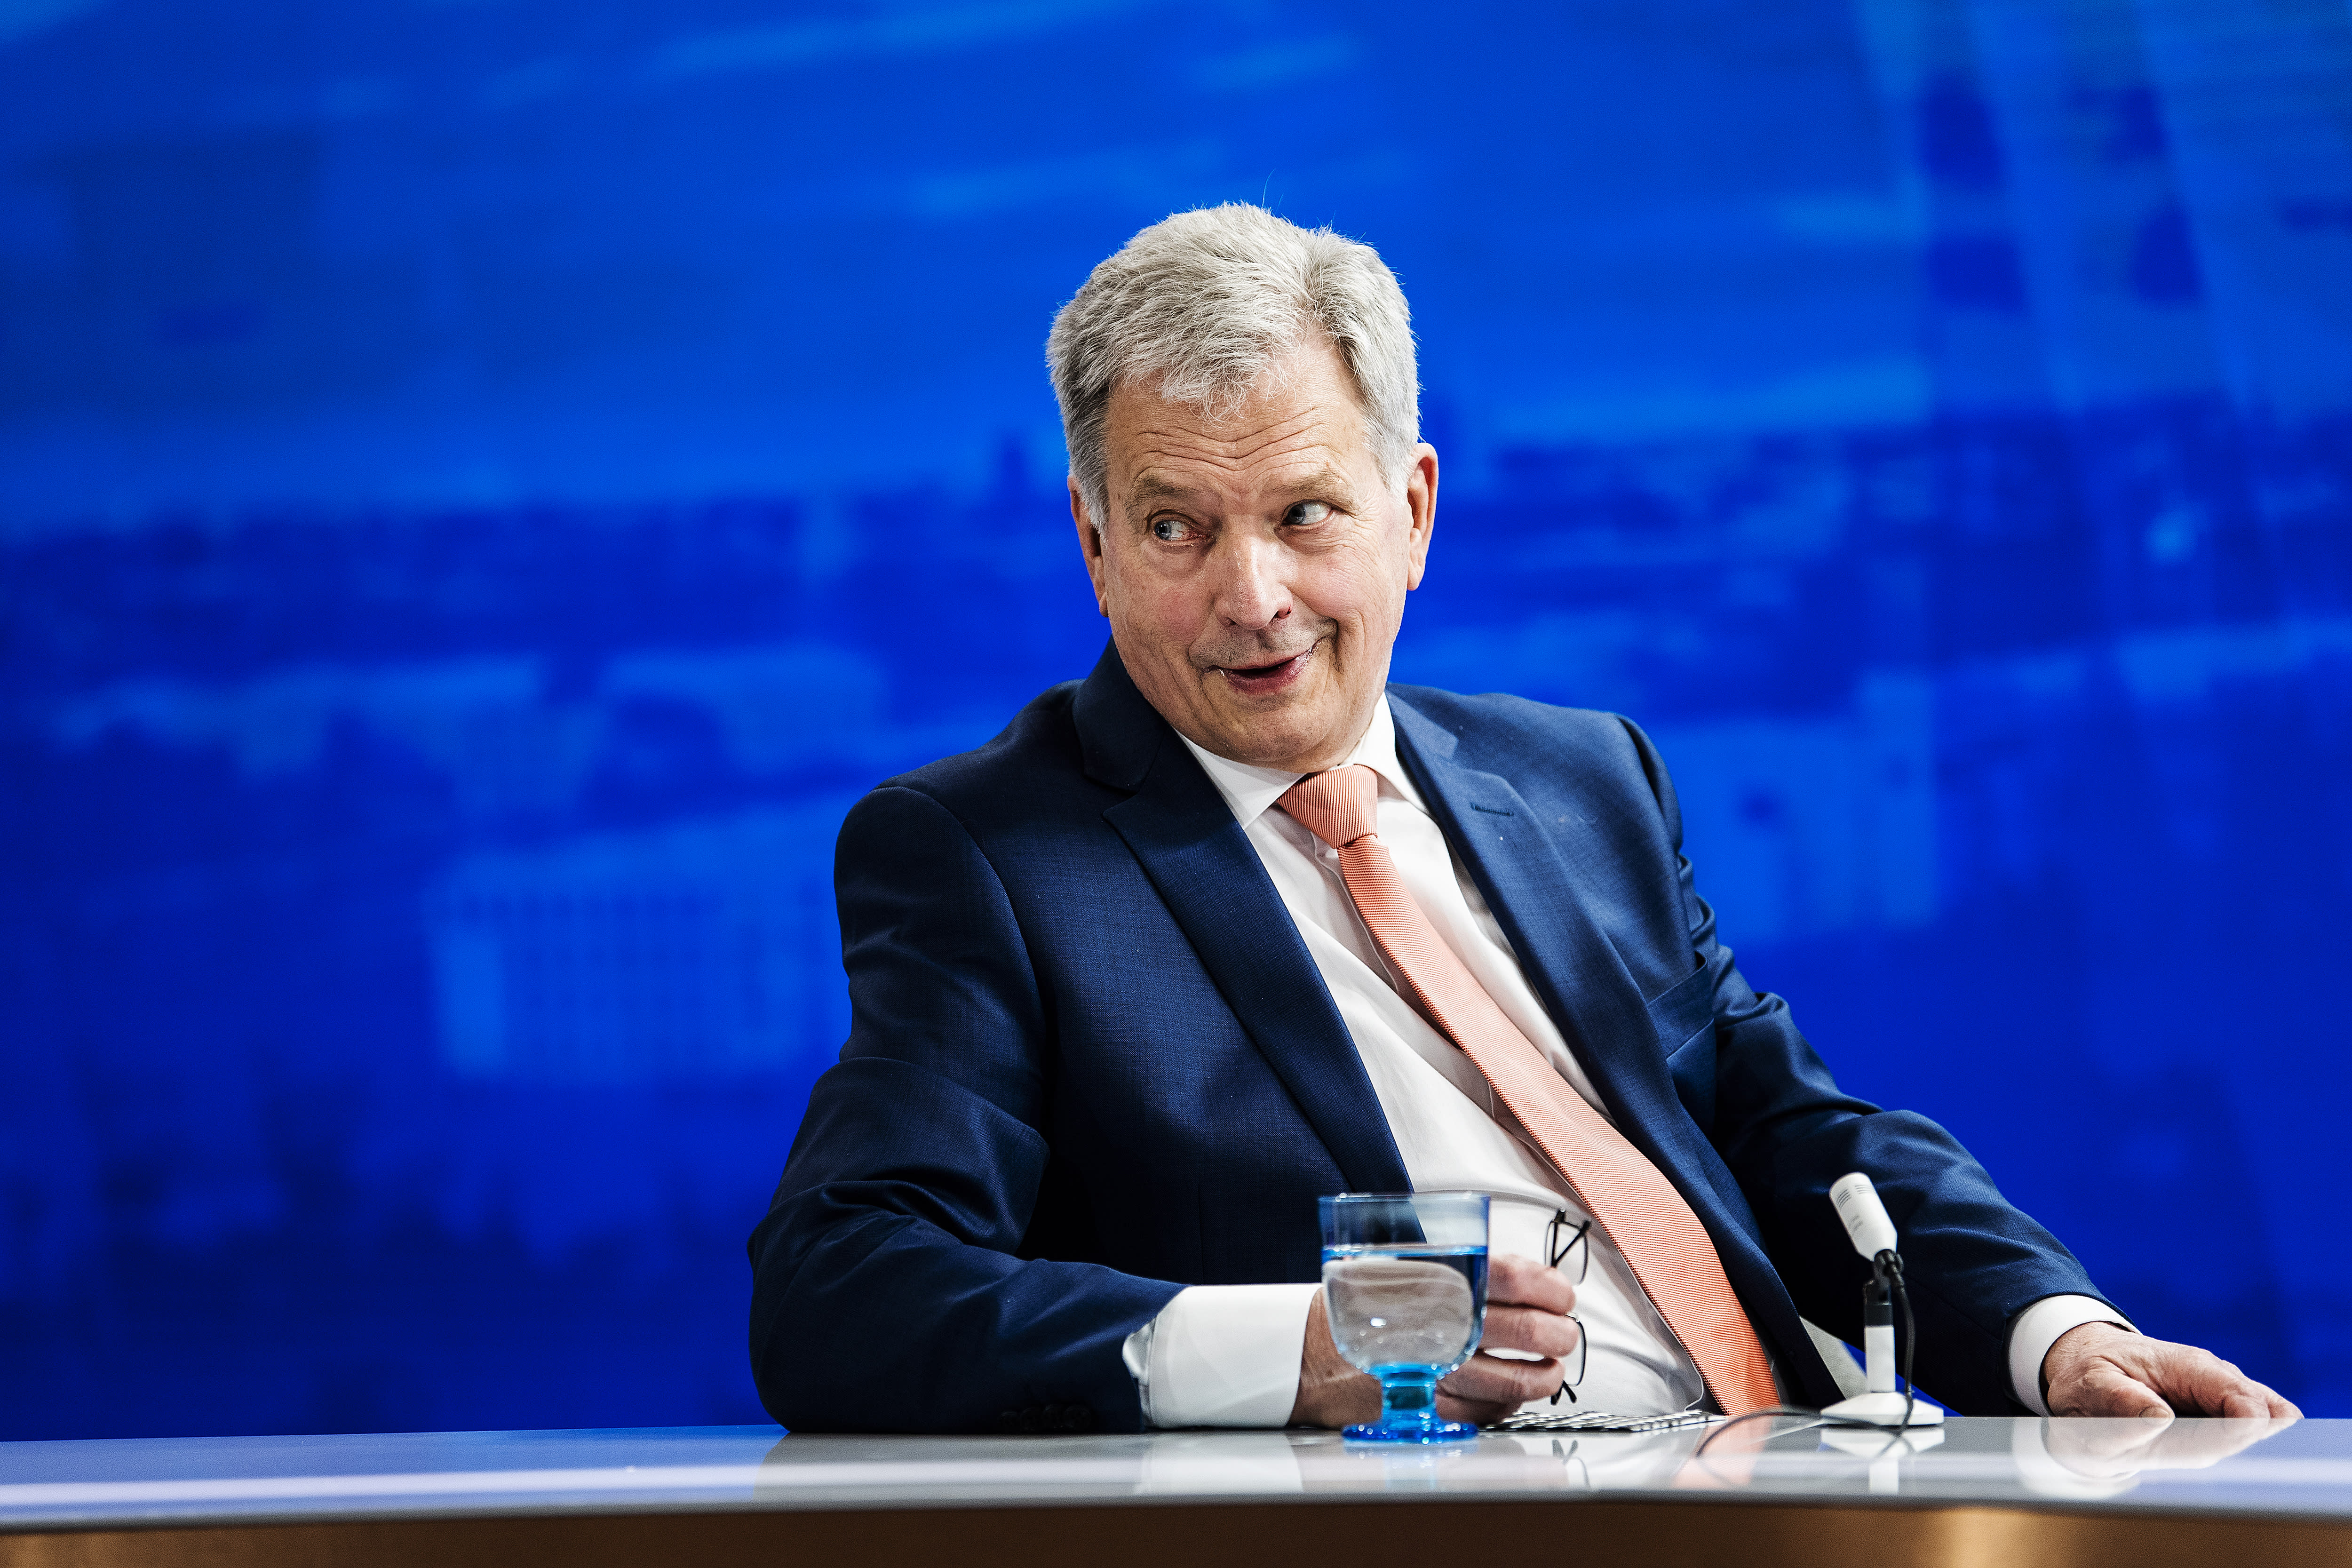 Niinistö: The Russia-US summit is unlikely to help the Navalny situation